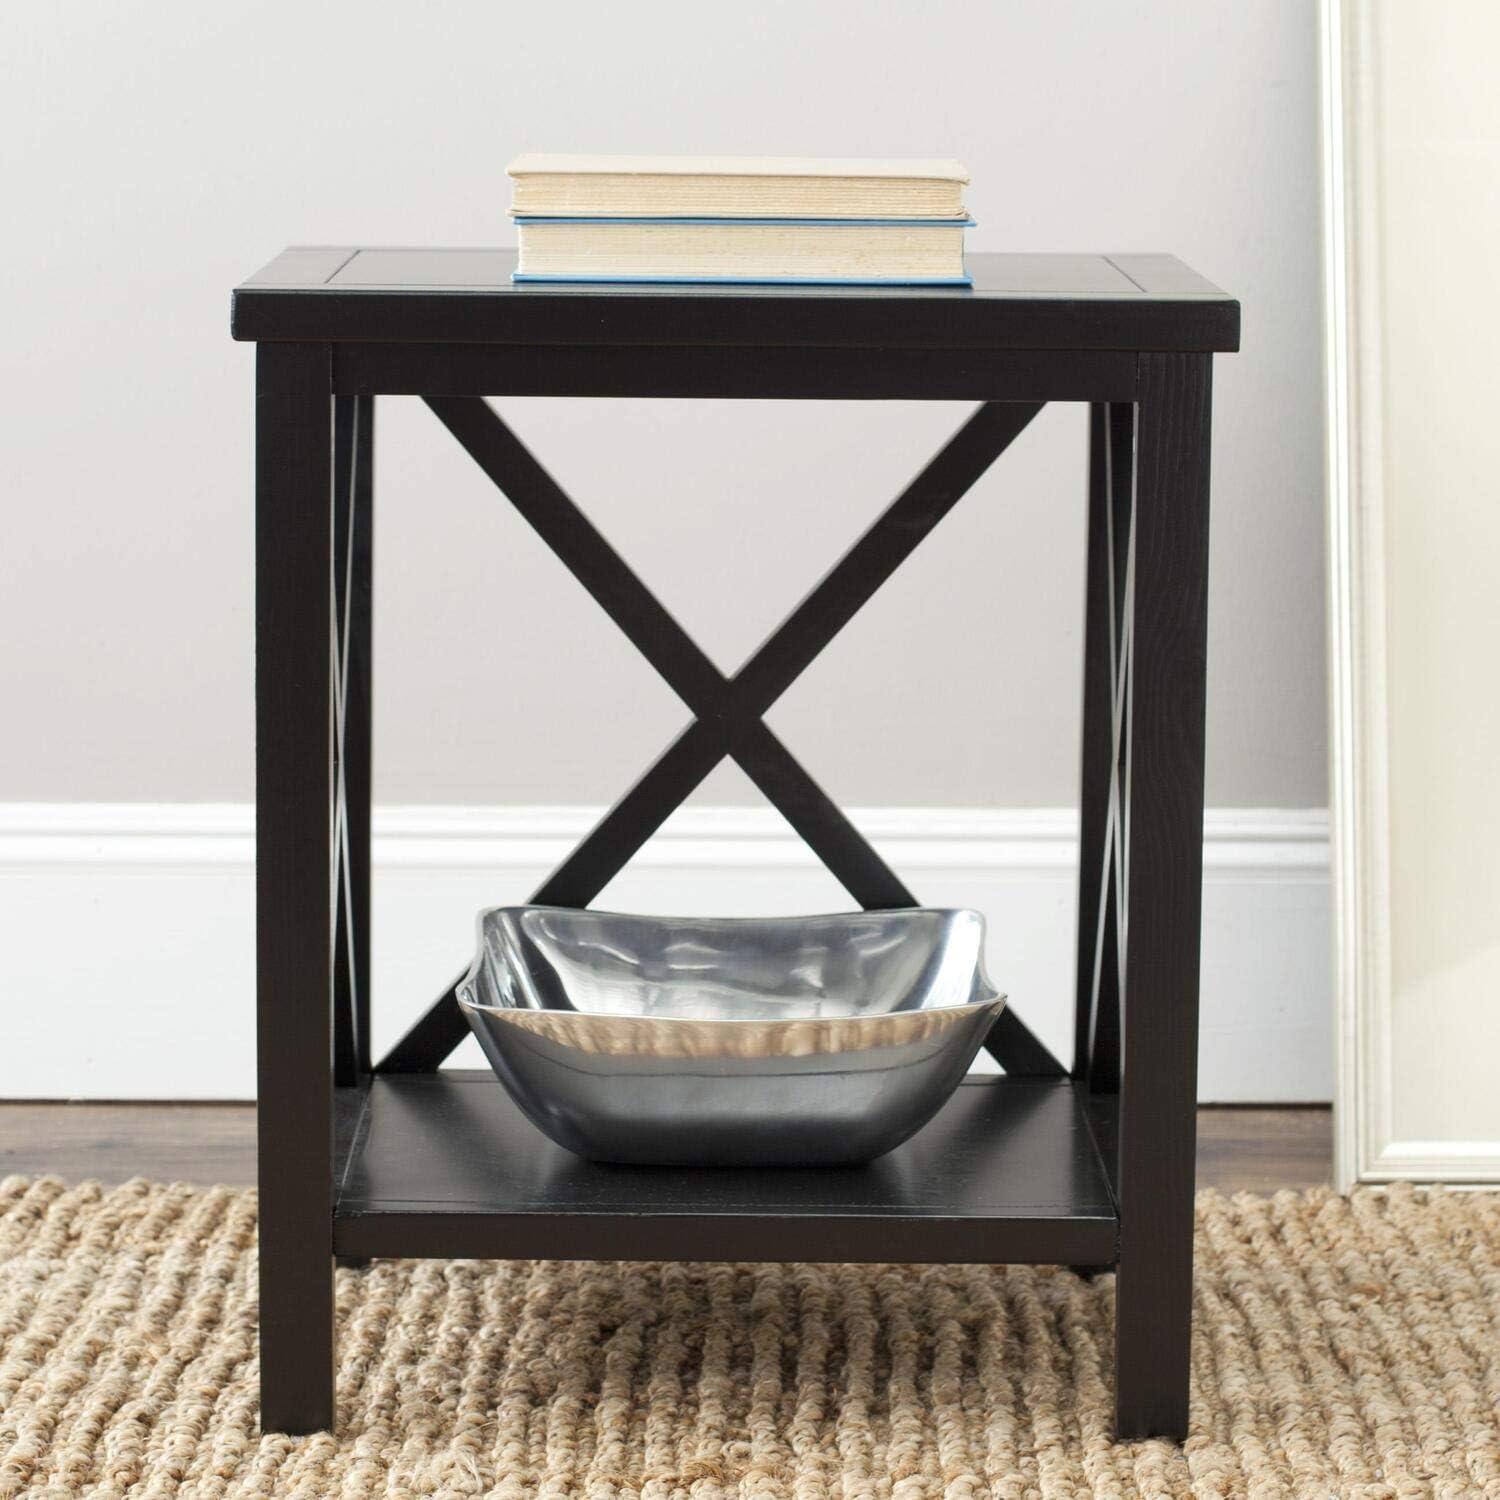 Transitional Teal Wood and Stone Rectangular End Table